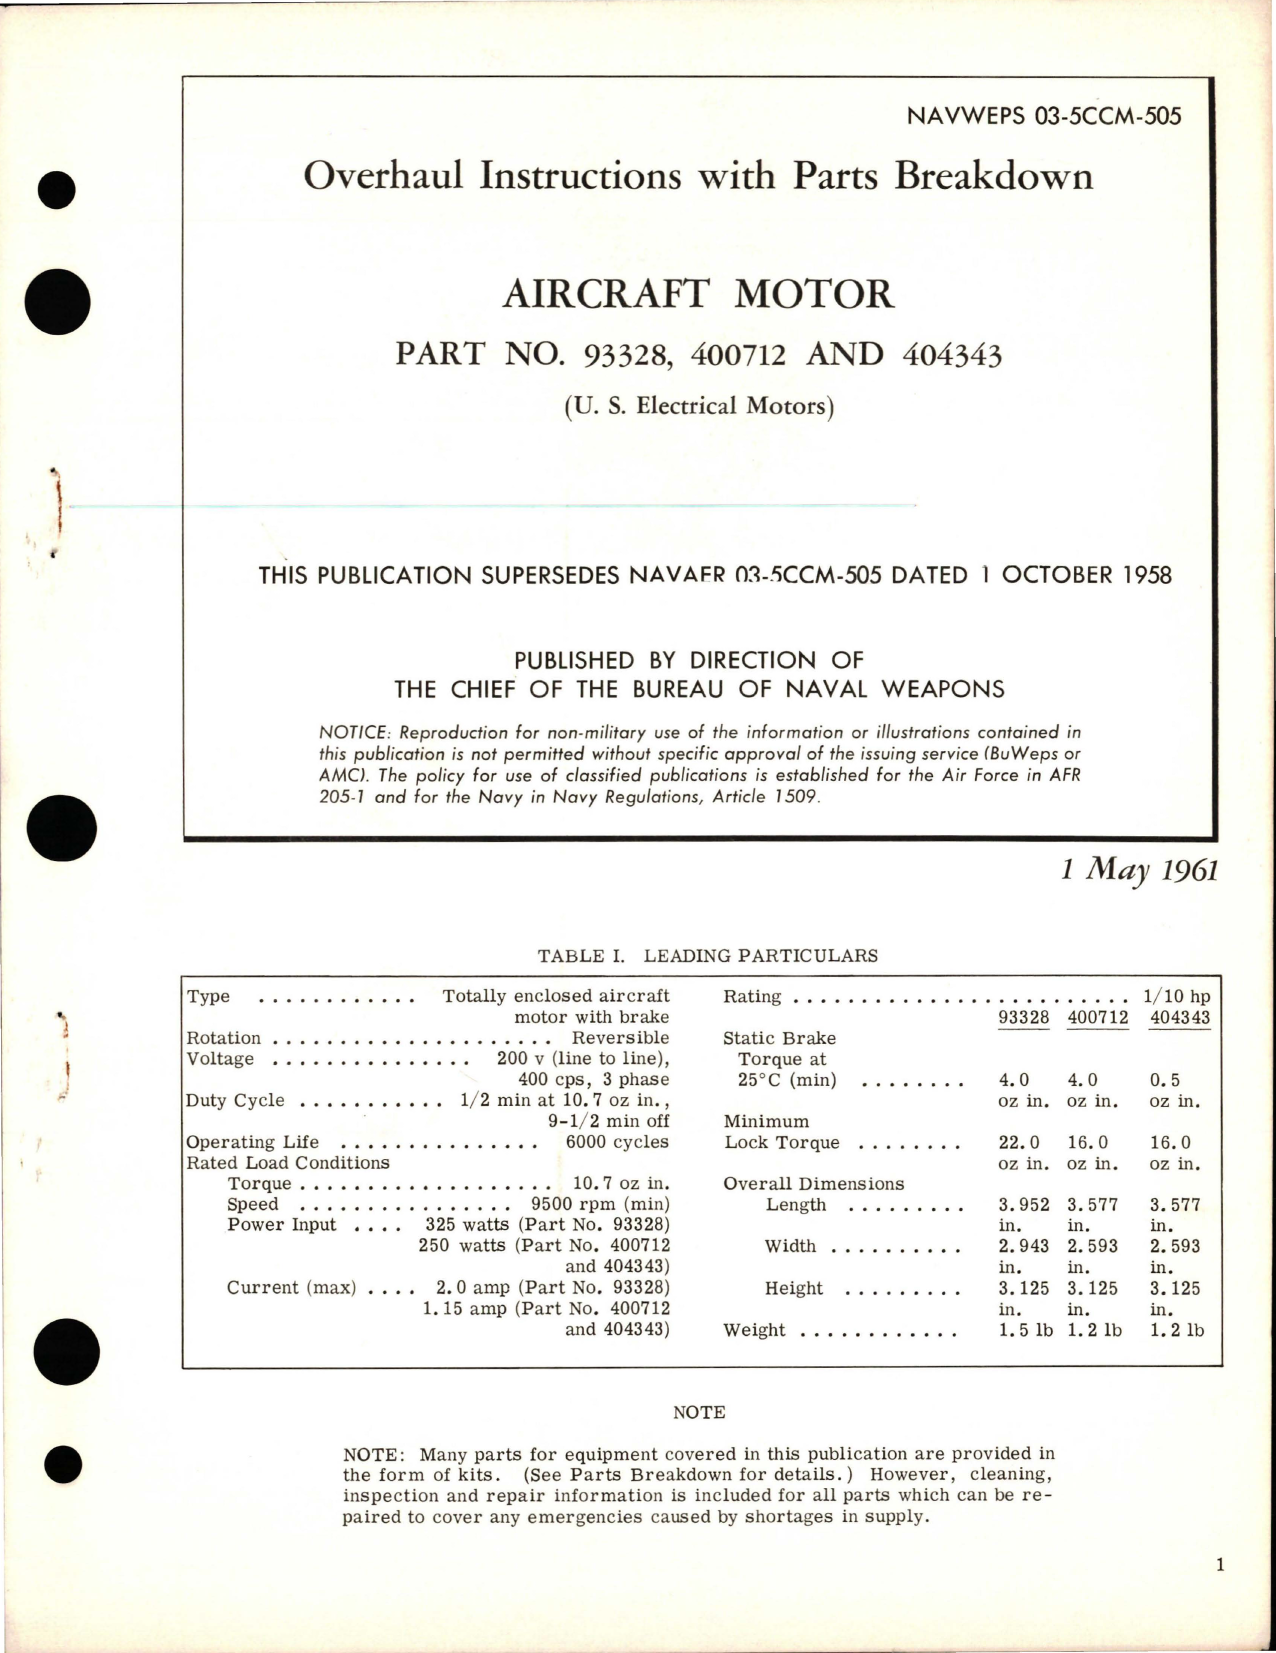 Sample page 1 from AirCorps Library document: Overhaul Instructions with Parts Breakdown for Aircraft Motors - Parts 93328, 400712, and 404343 